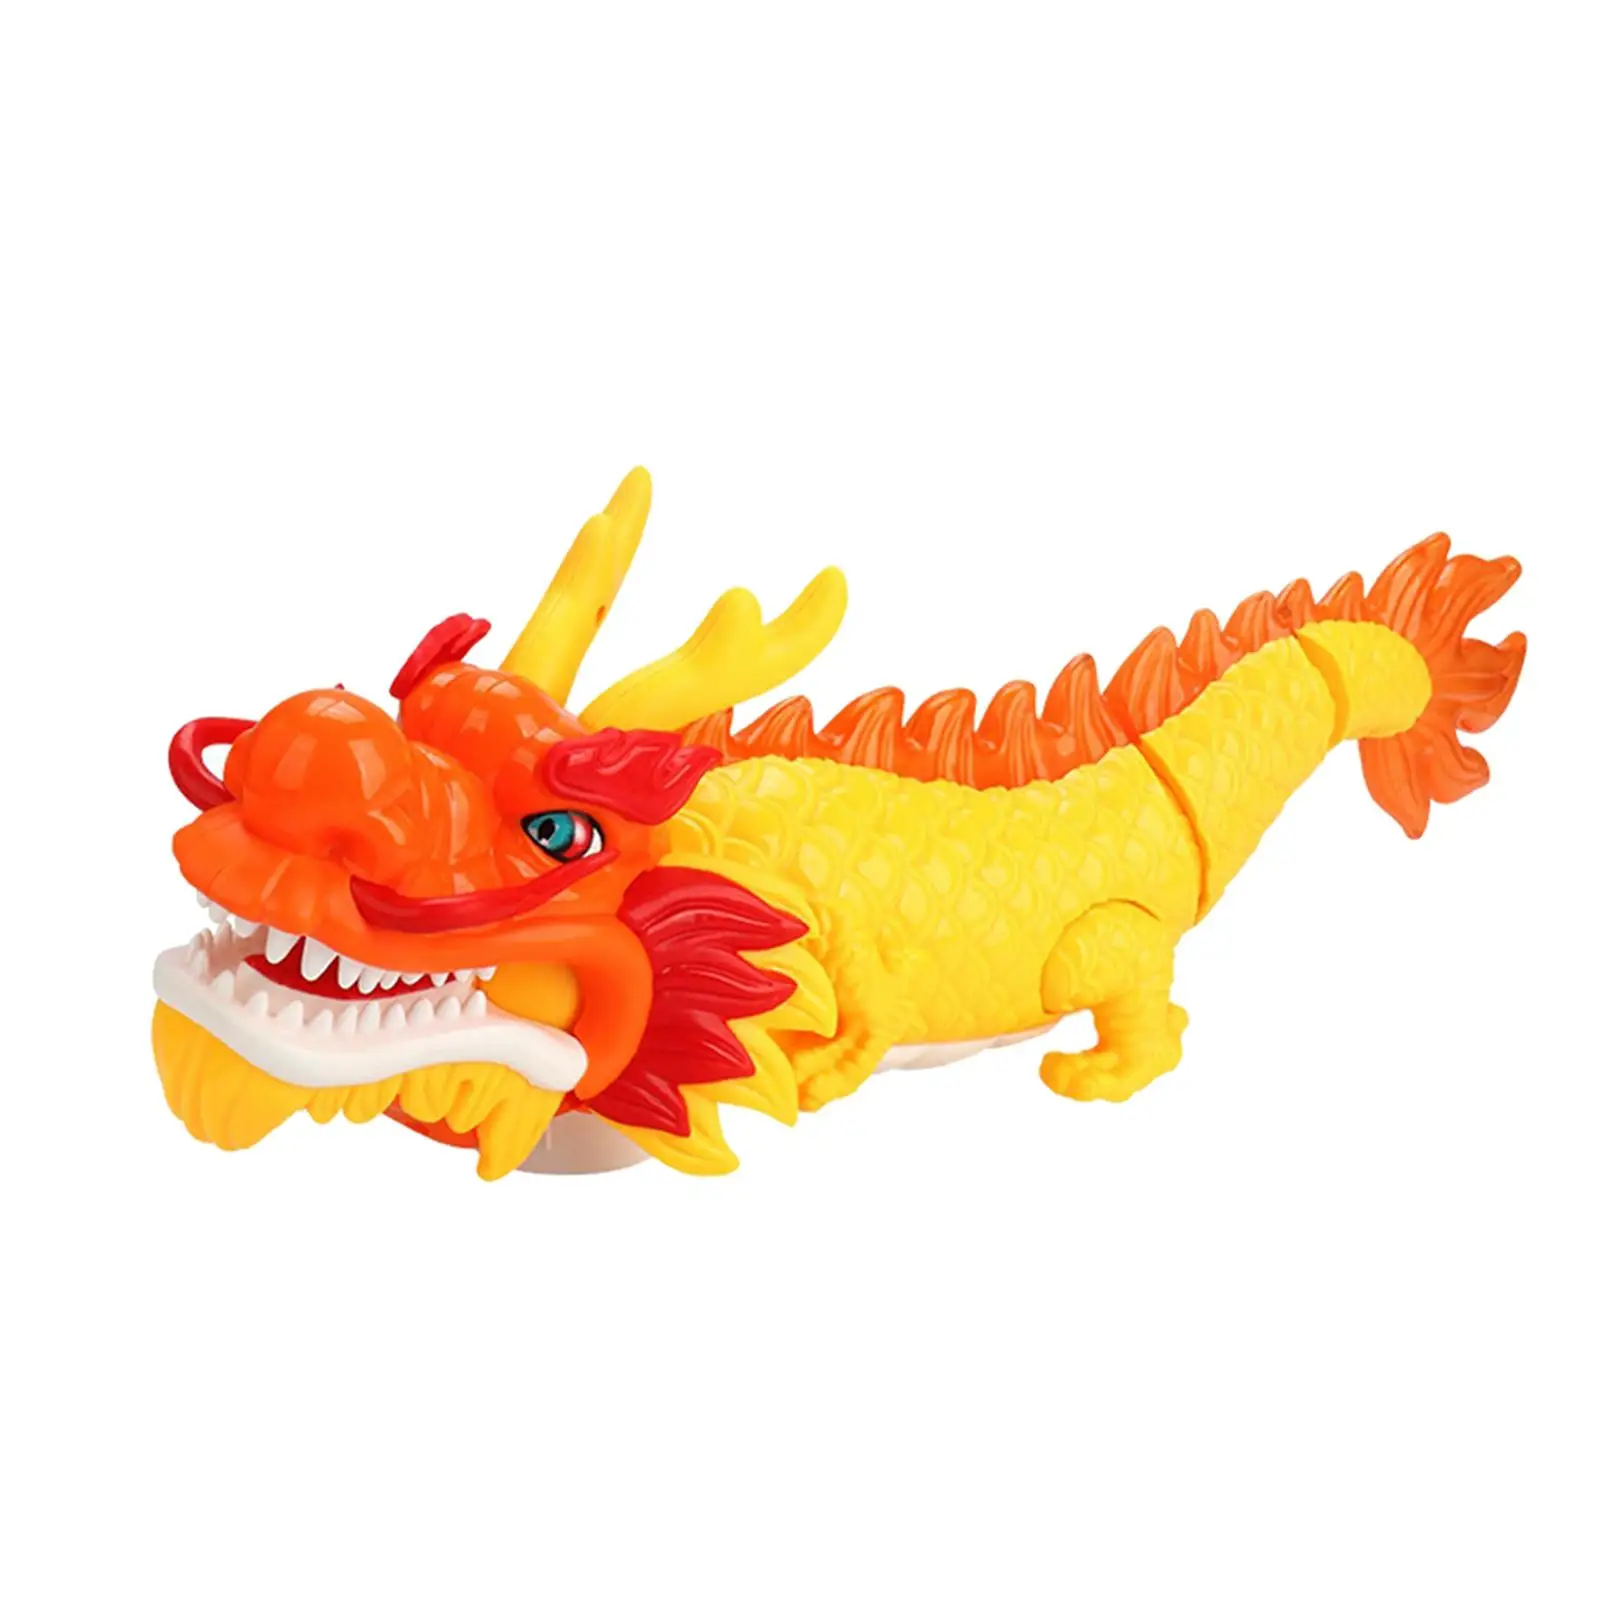 Eletric Dragon Toy Mechanical High Simulation Gifts Animal Novelty Walking Flexible for Age 8-12 Children Girls Boys Adults